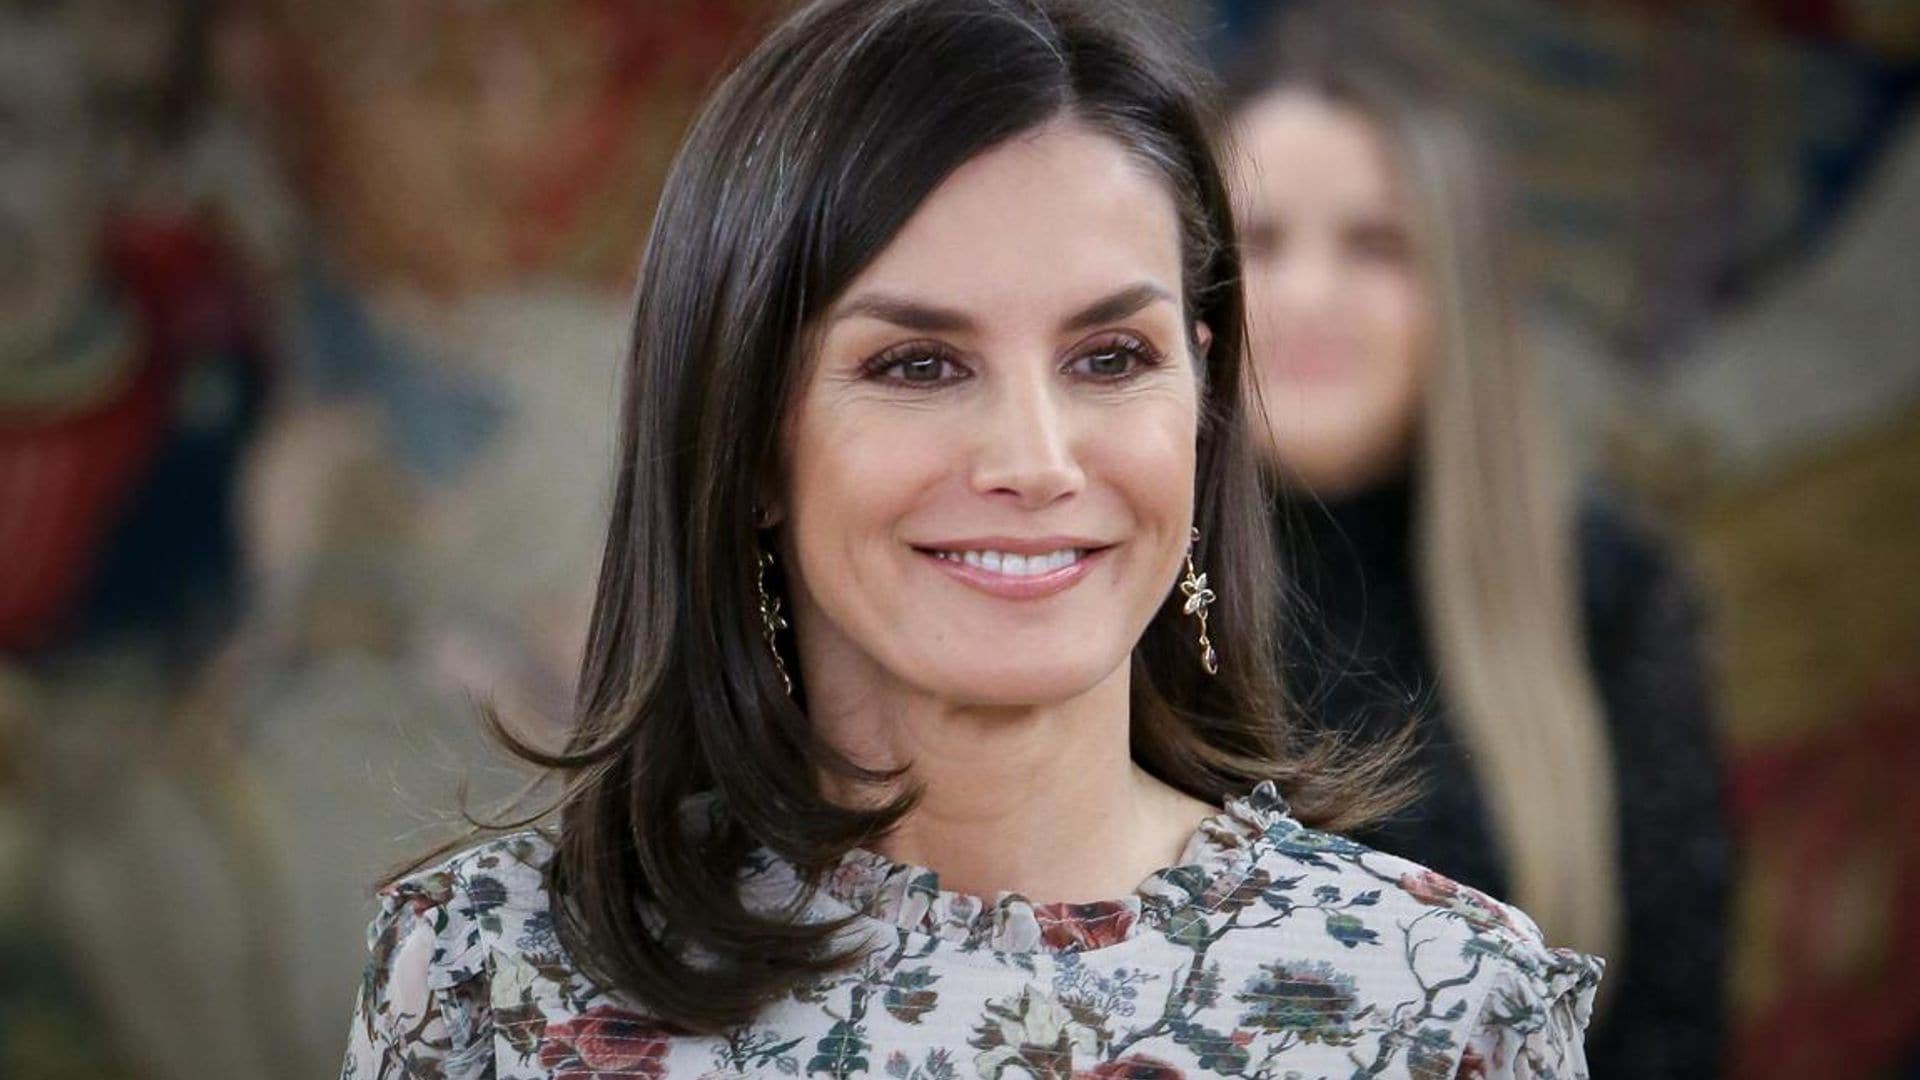 Queen Letizia changes her look and rocks luscious bouncy curls - See the photos